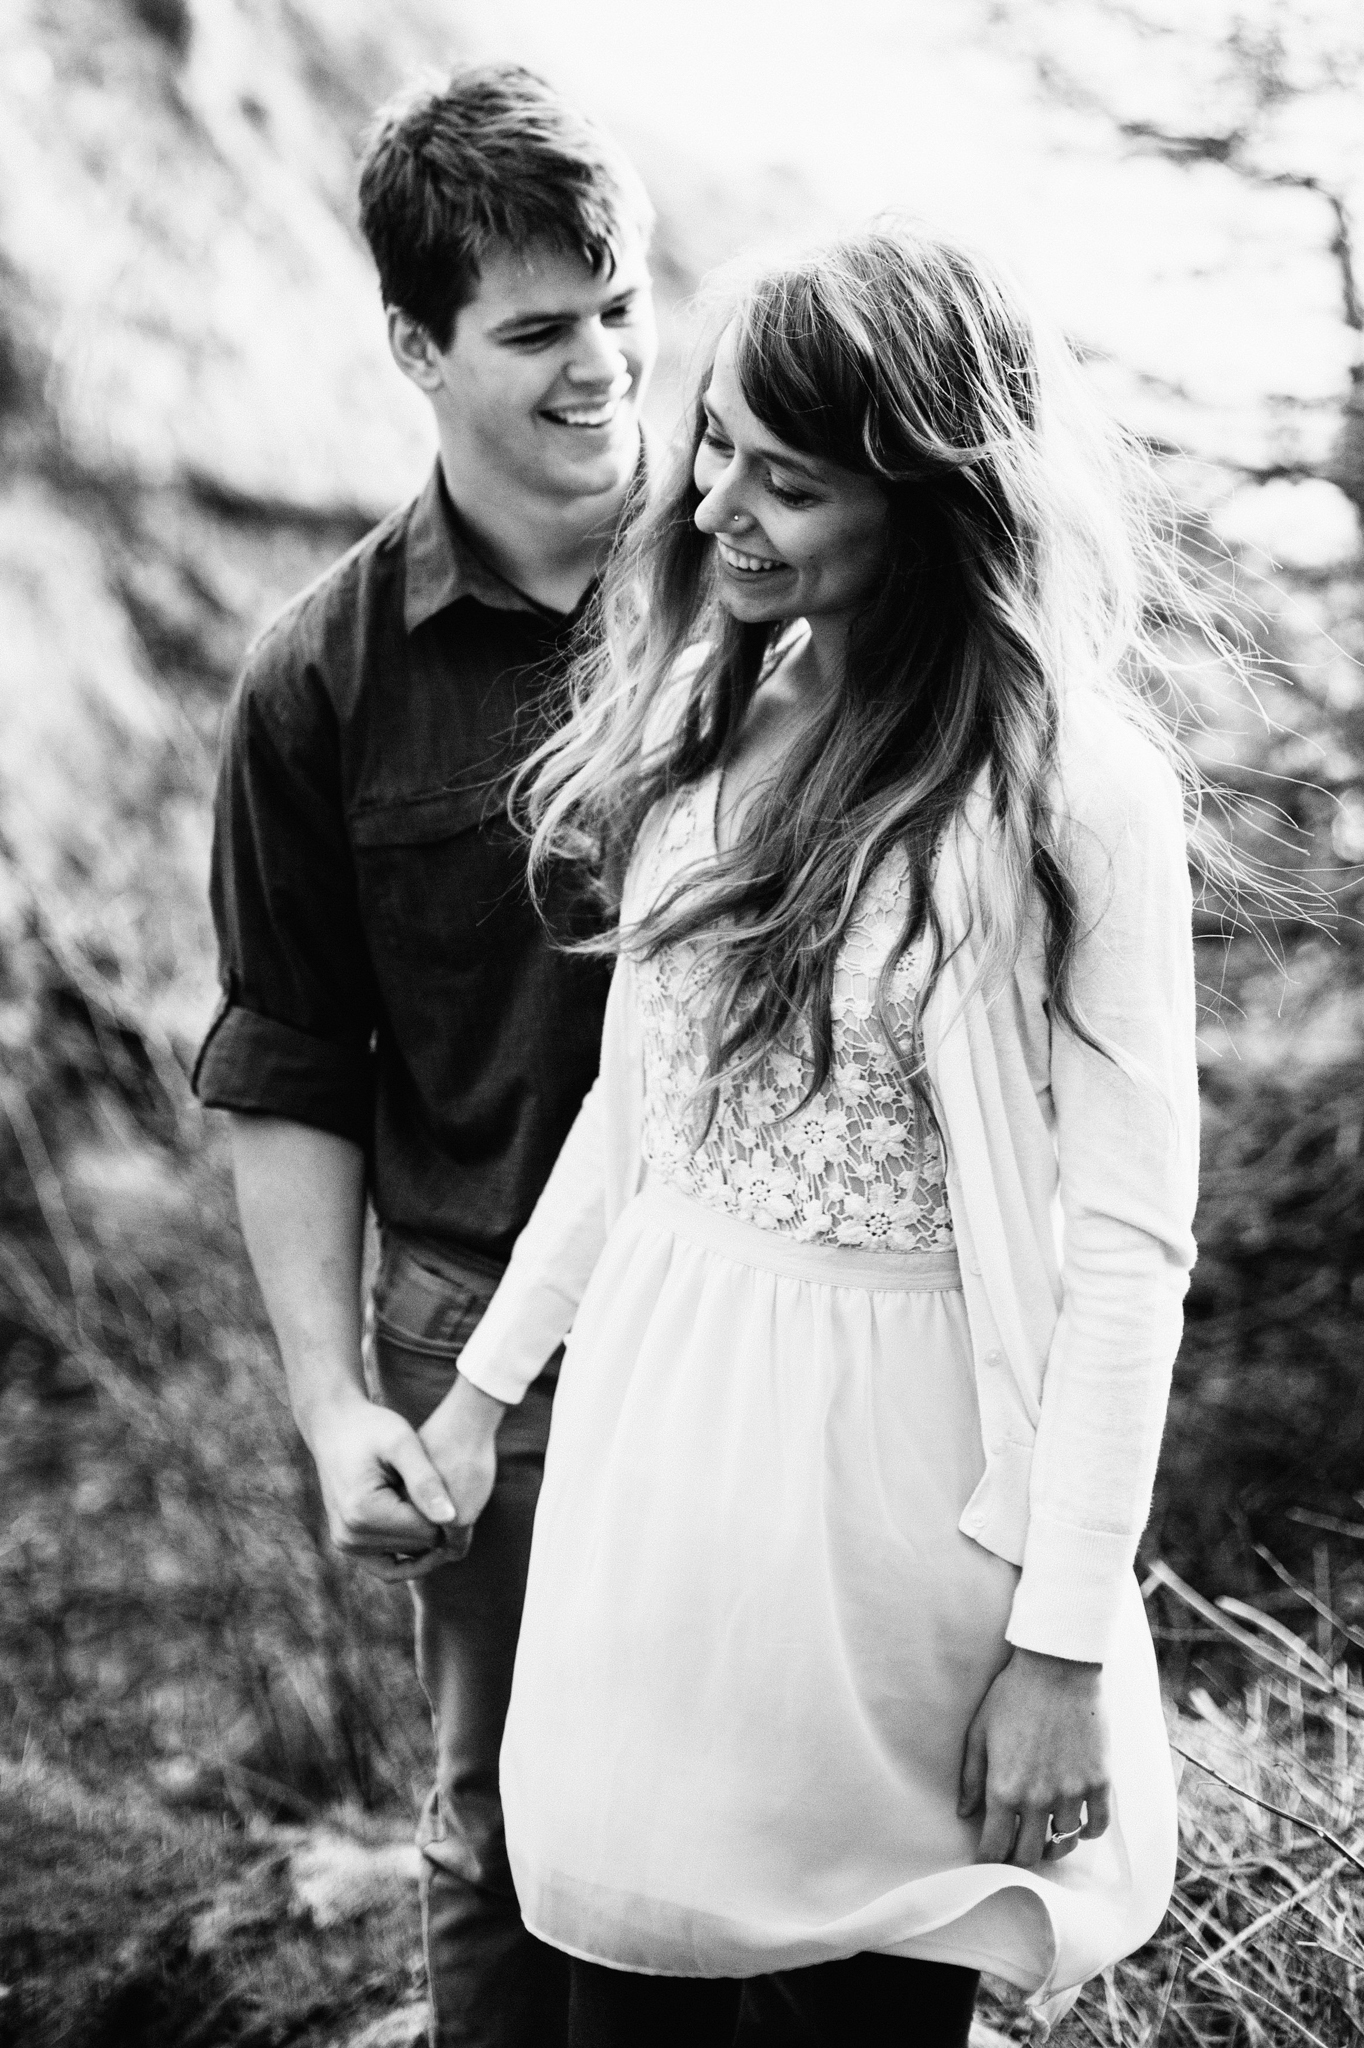 Vancouver Whytecliff Park Engagement Photographer - Emmy Lou Virginia Photography-17.jpg